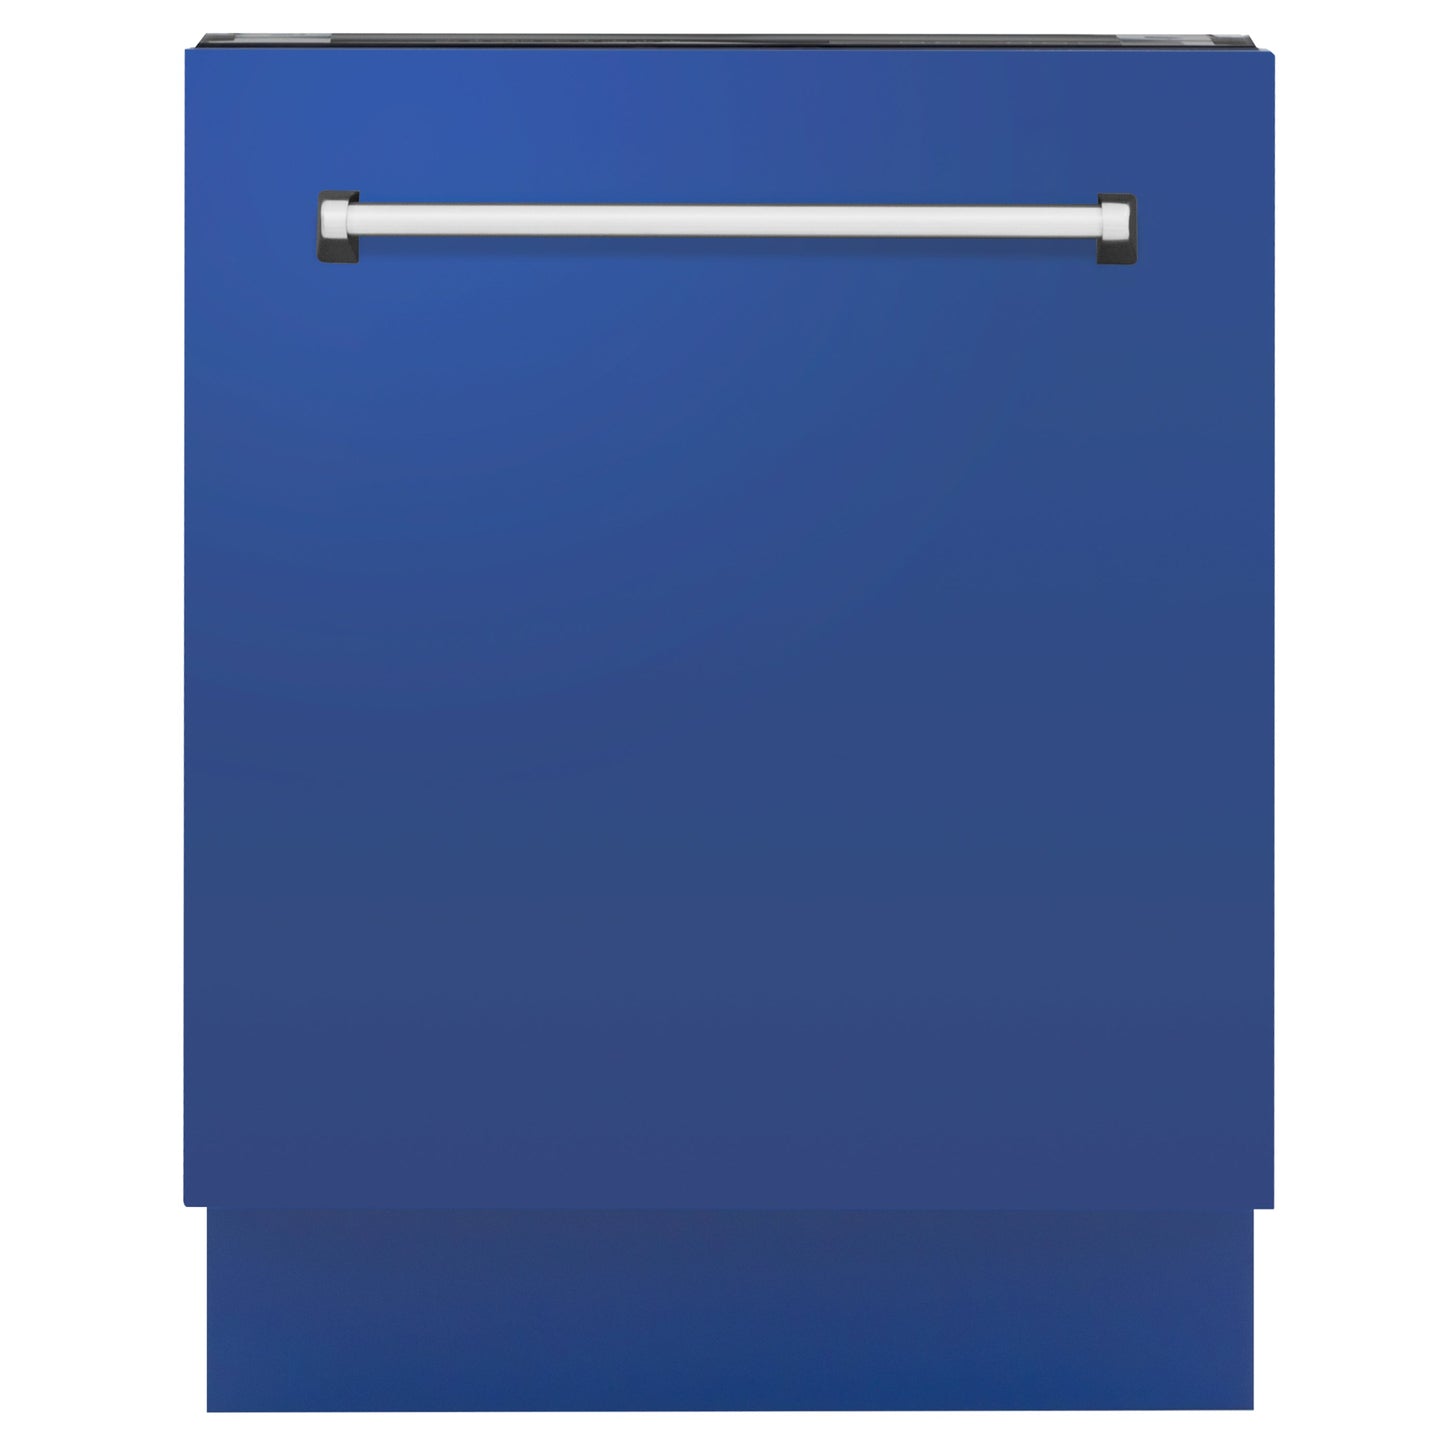 ZLINE 24" Tallac Series 3rd Rack Dishwasher with Blue Matte Panel and Traditional Handle, 51dBa (DWV-BM-24)